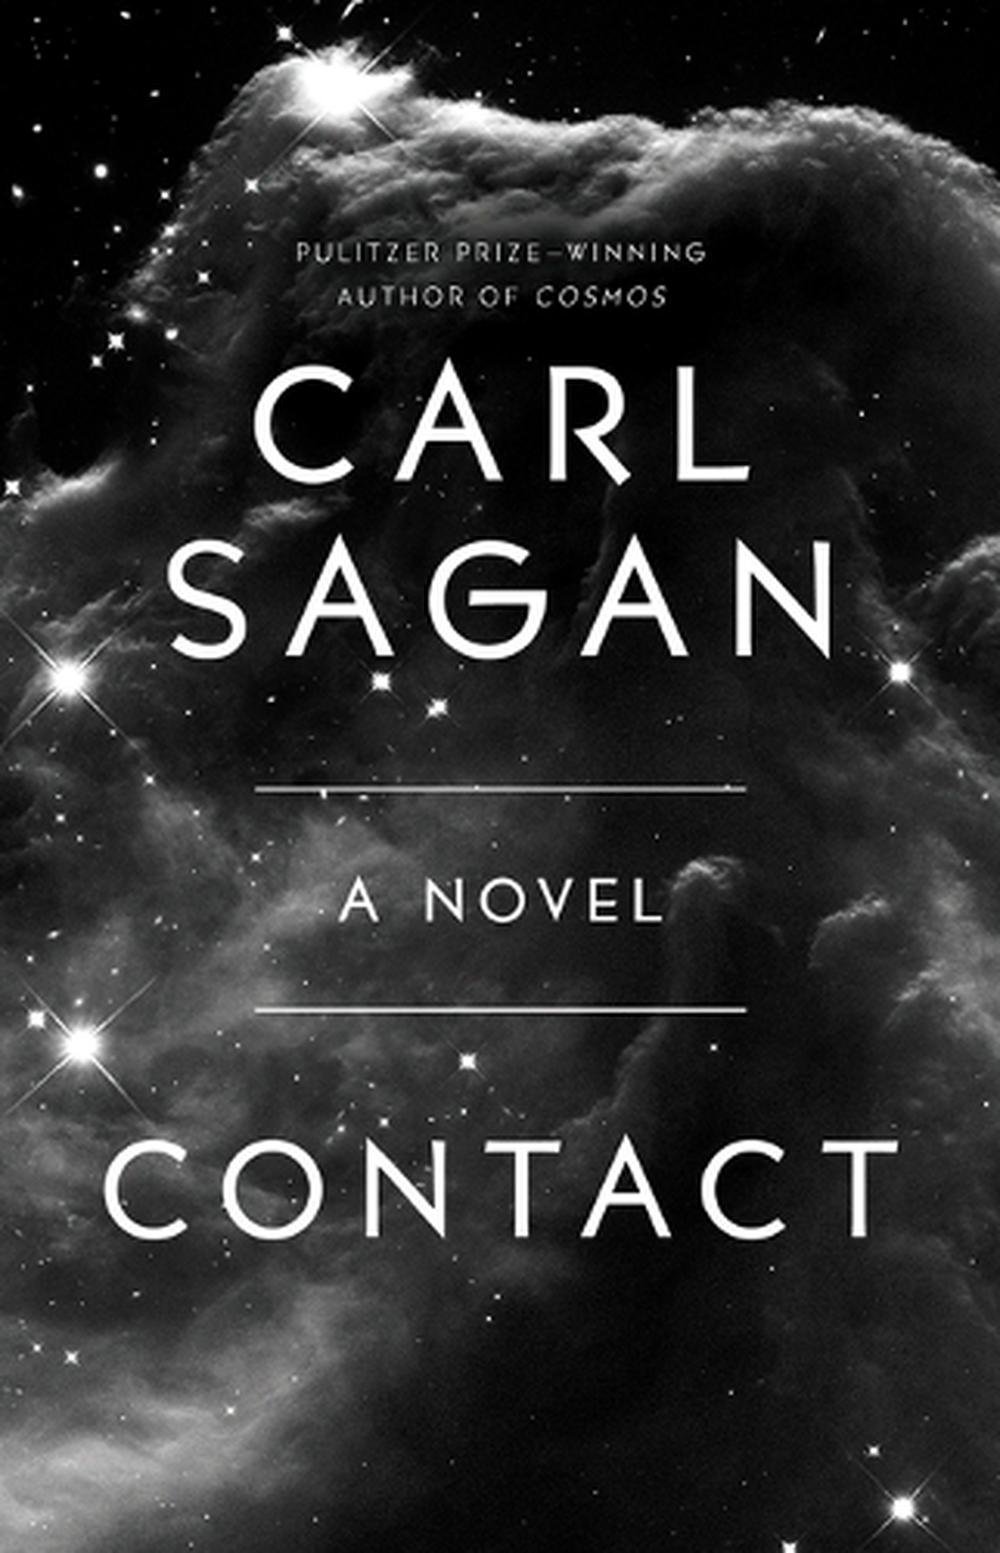 Contact by Carl Sagan, Paperback, 9781501197987 | Buy online at The Nile